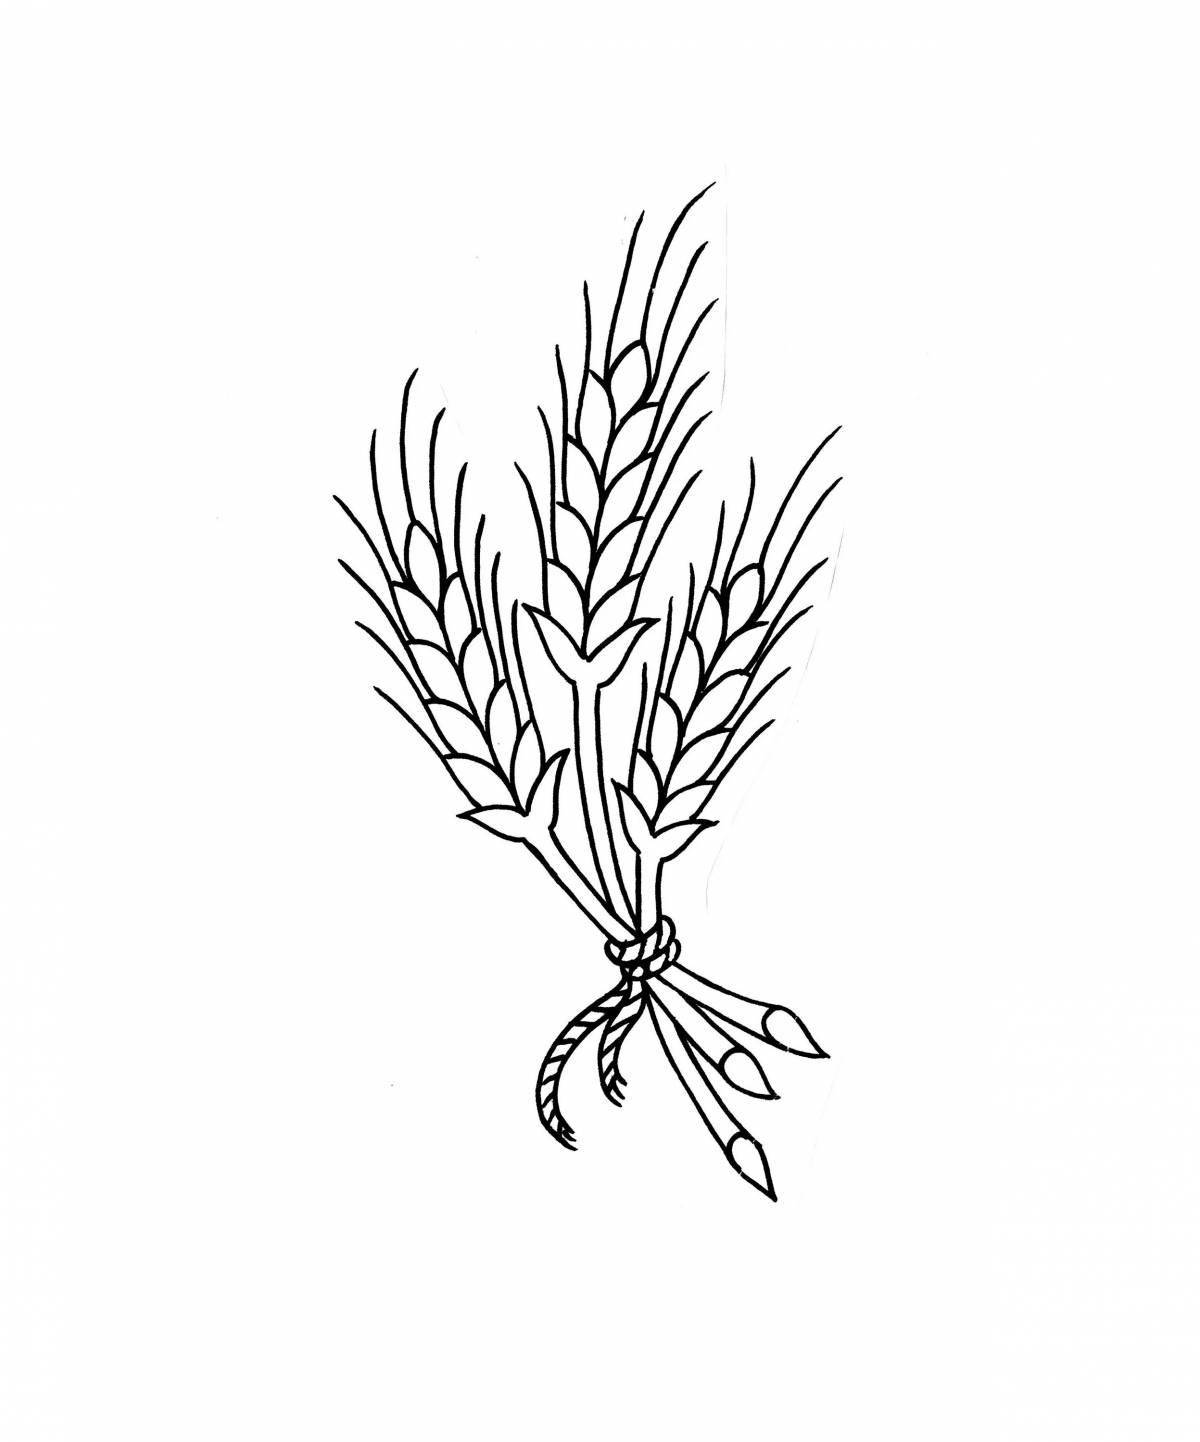 A playful coloring of a spikelet of wheat for children